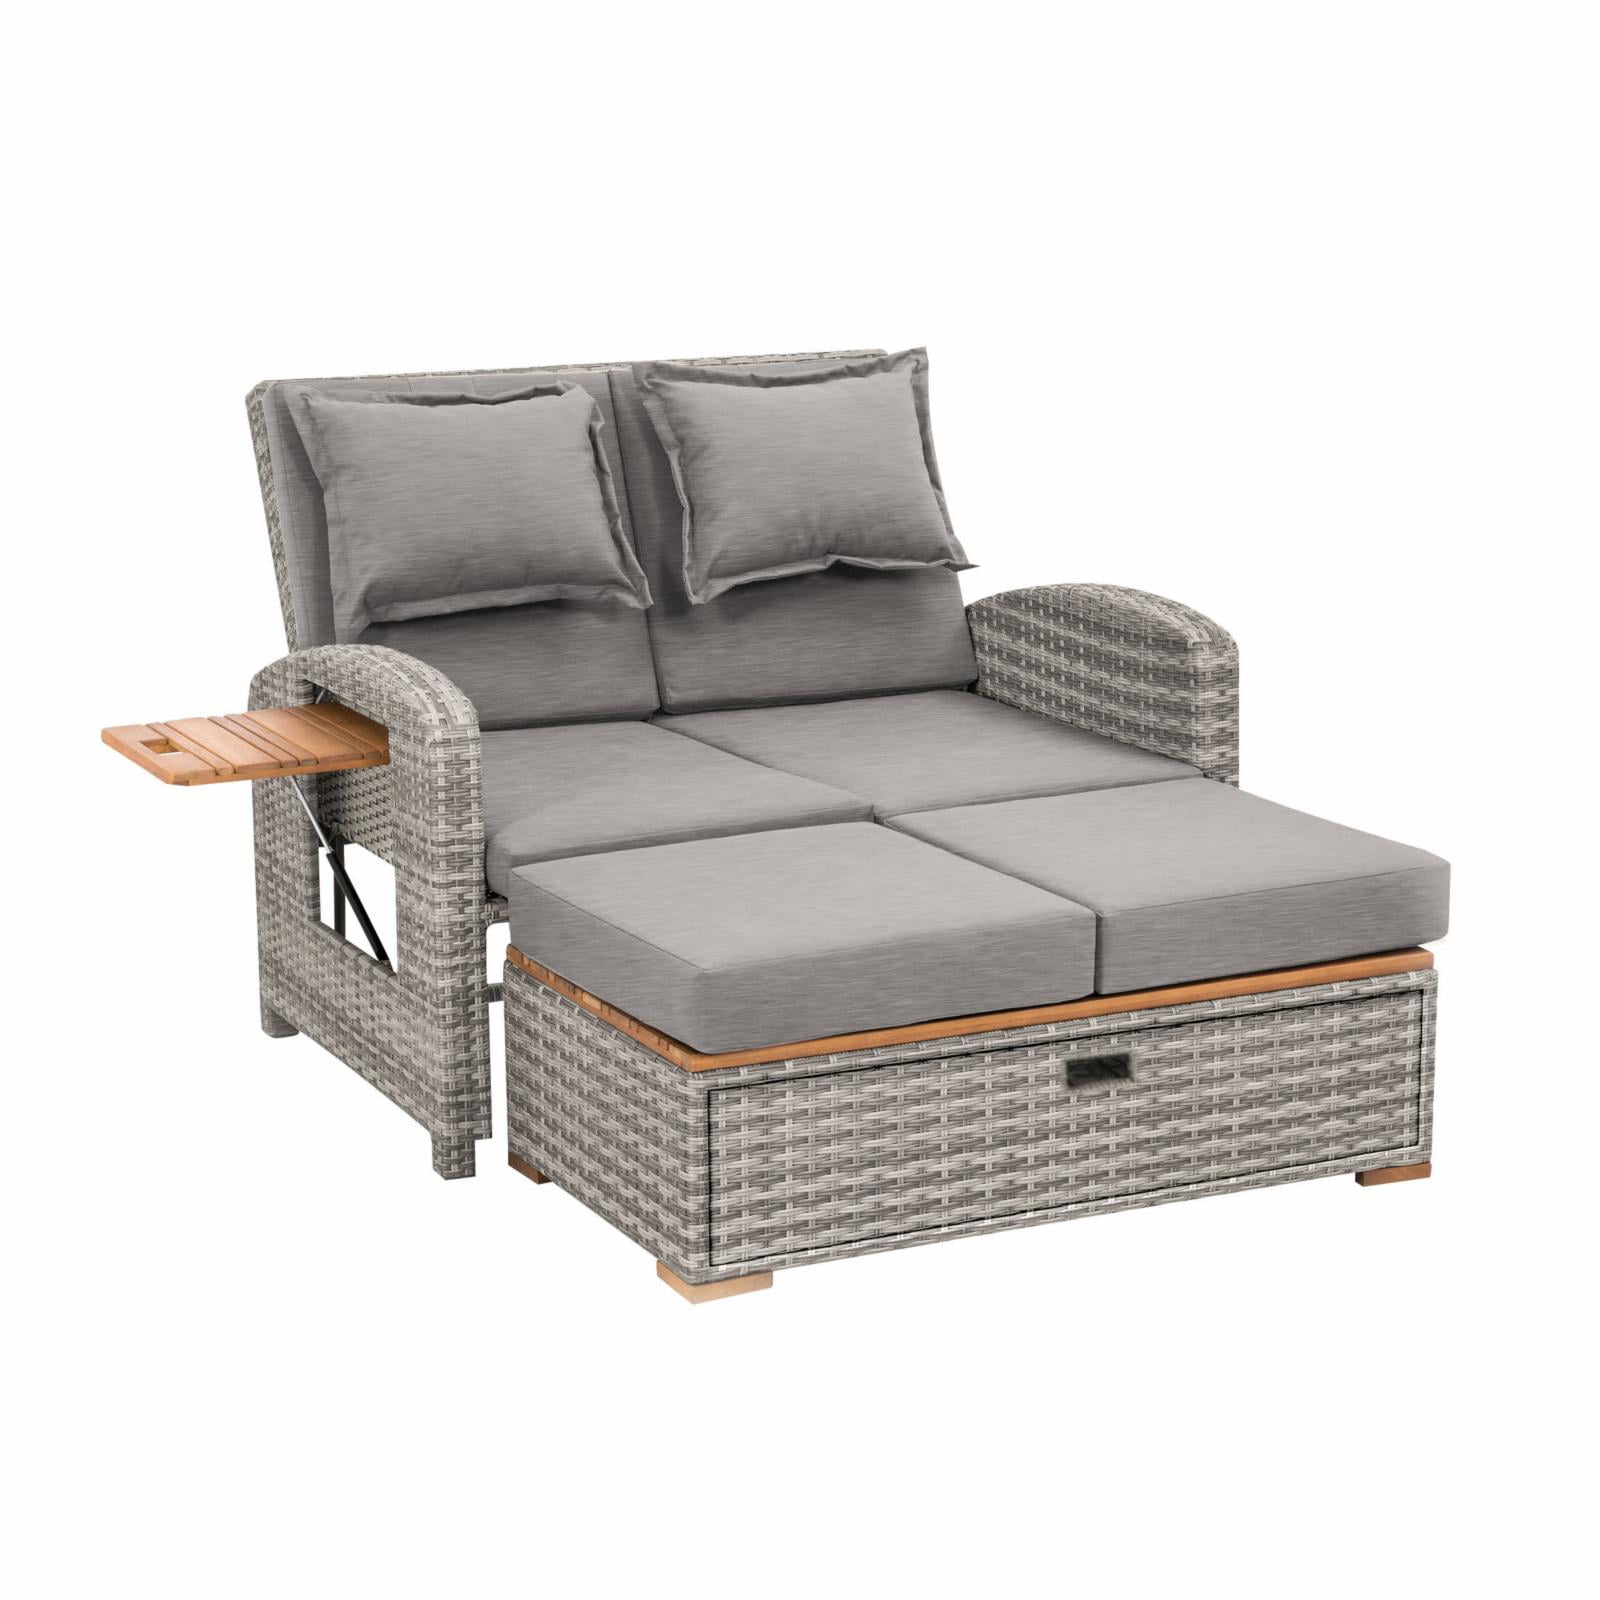 Solid Gray/Natural Modular Bahia Tobago Daybed Wood Greemotion Teak Outdoor in